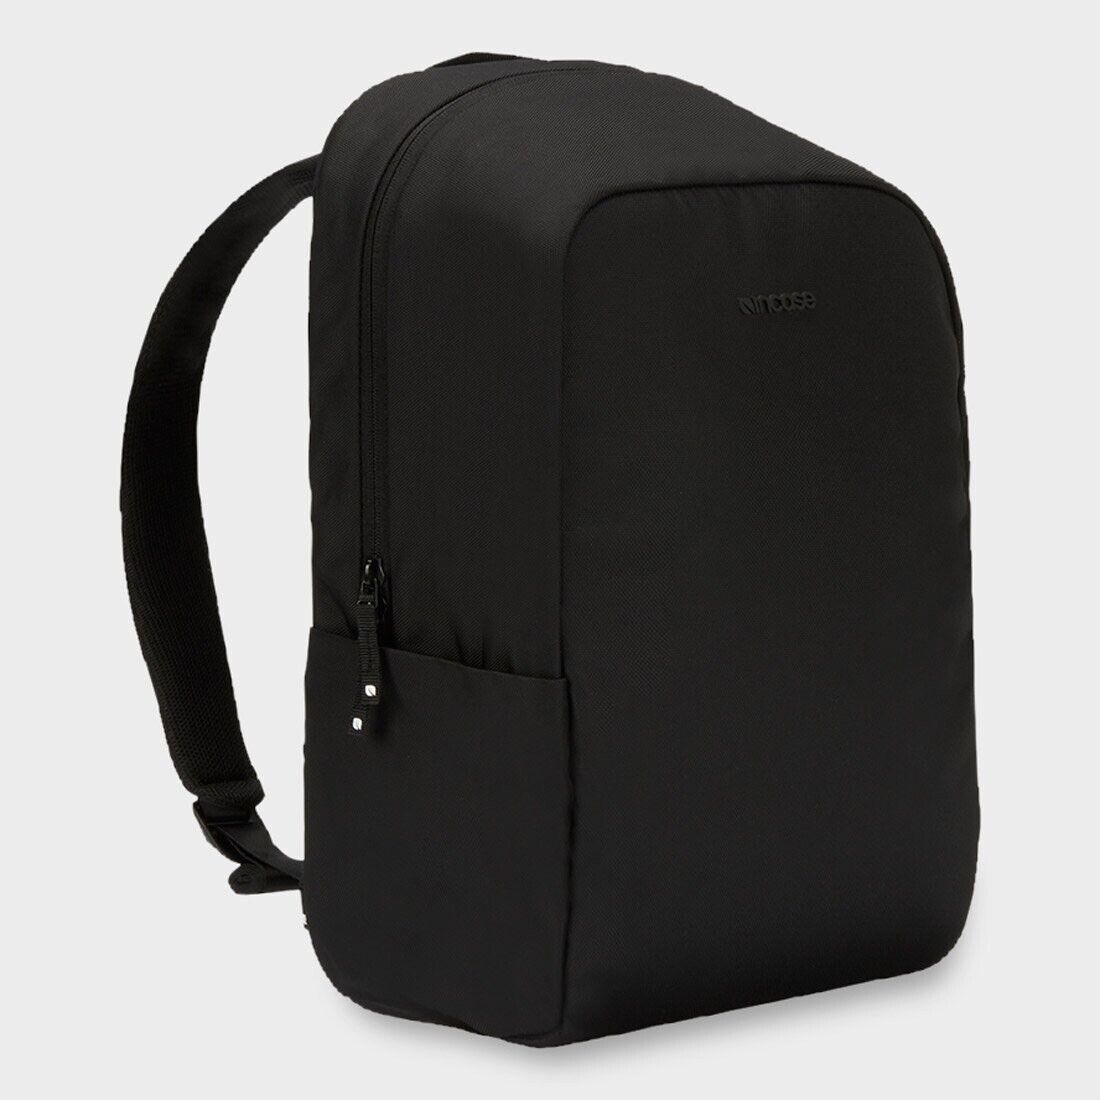 Get the perfect bag or backpack to carry your Macbook and keep it safe.